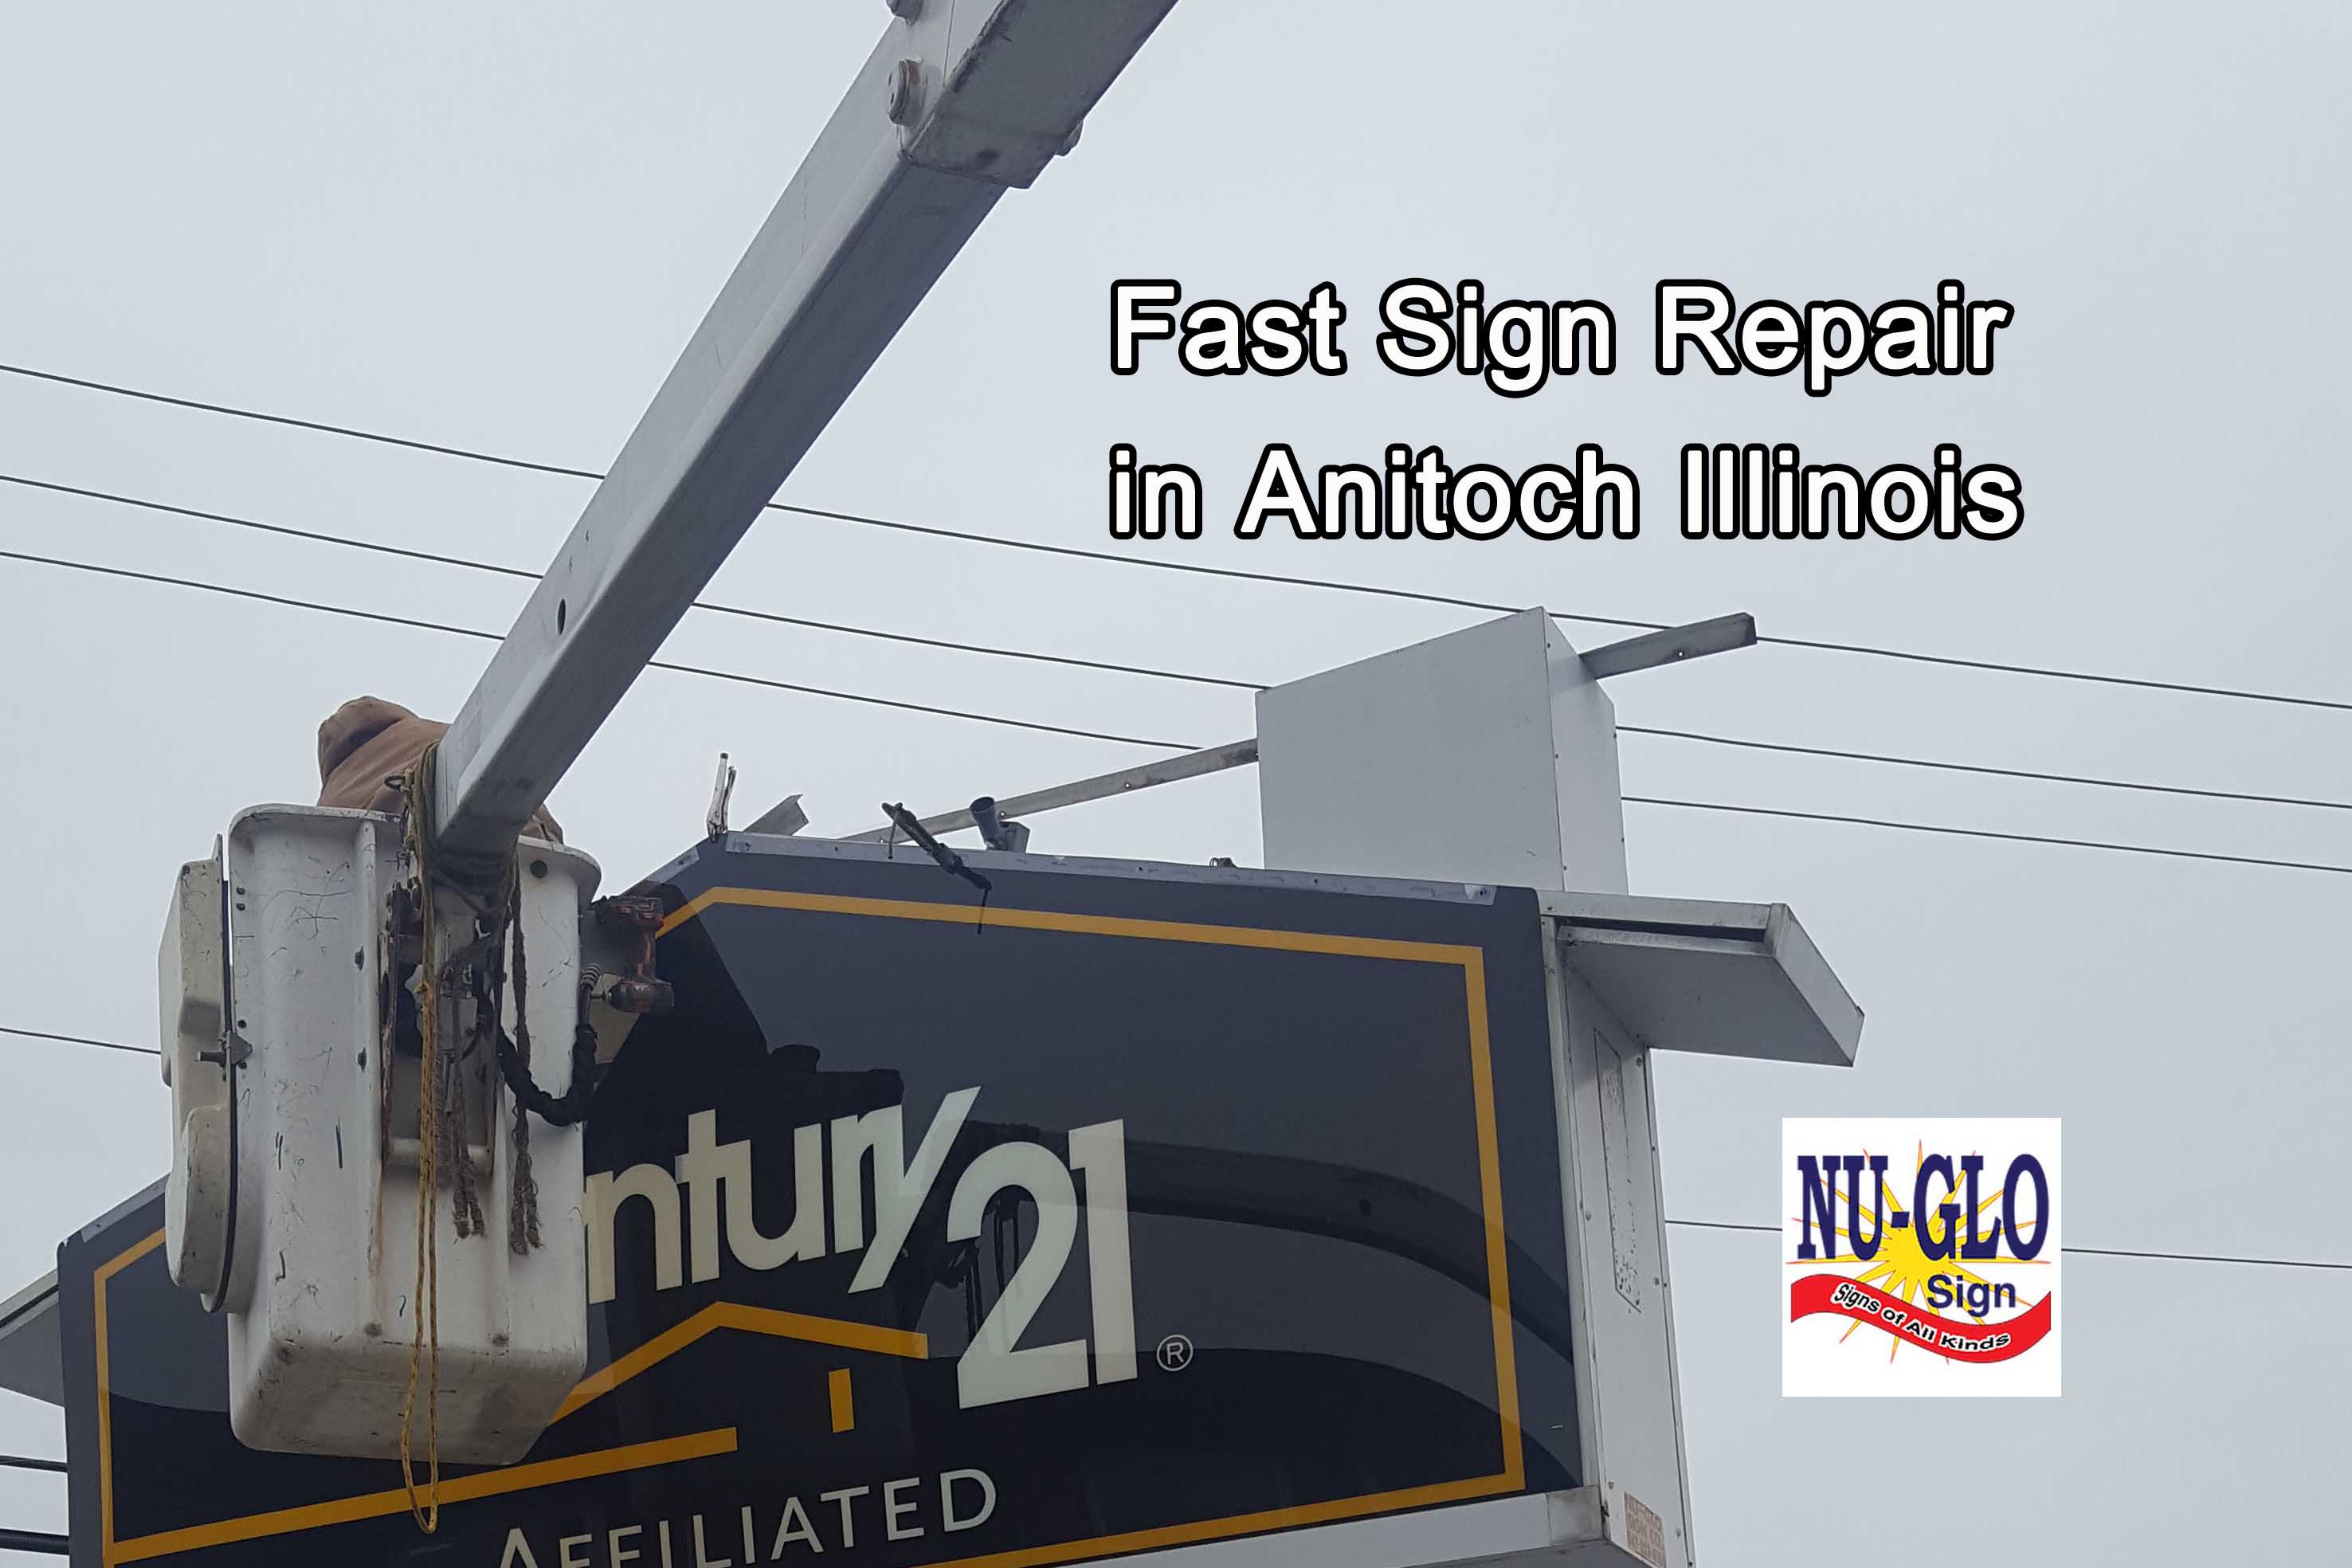 Fast Sign Repair in Antioch Illinois